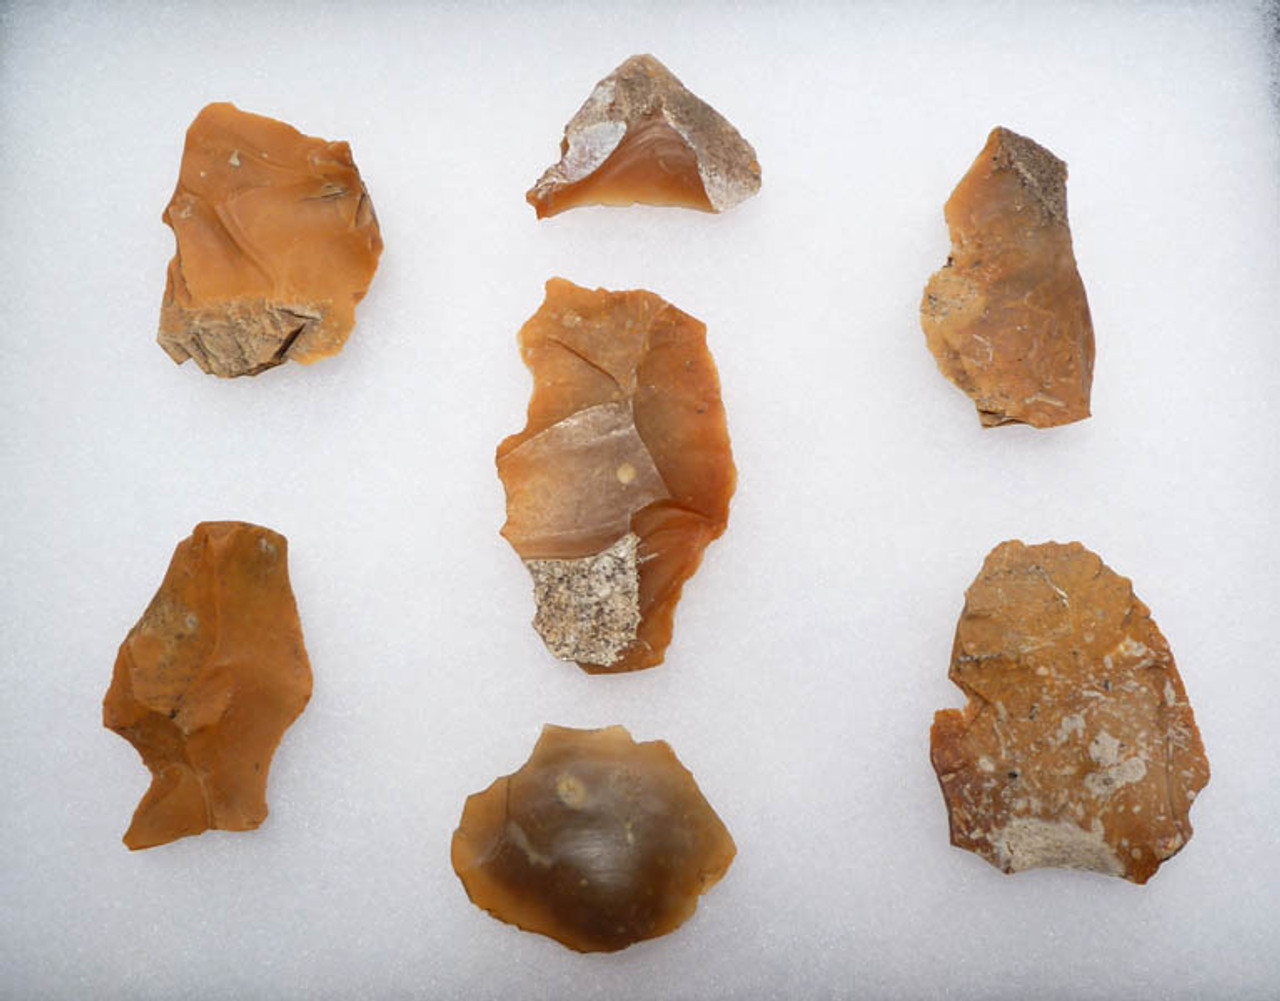 N103 - SET OF 7 FLINT EUROPEAN NEOLITHIC FLAKE TOOLS FROM THE FUNNEL BEAKER CULTURE OF EUROPE